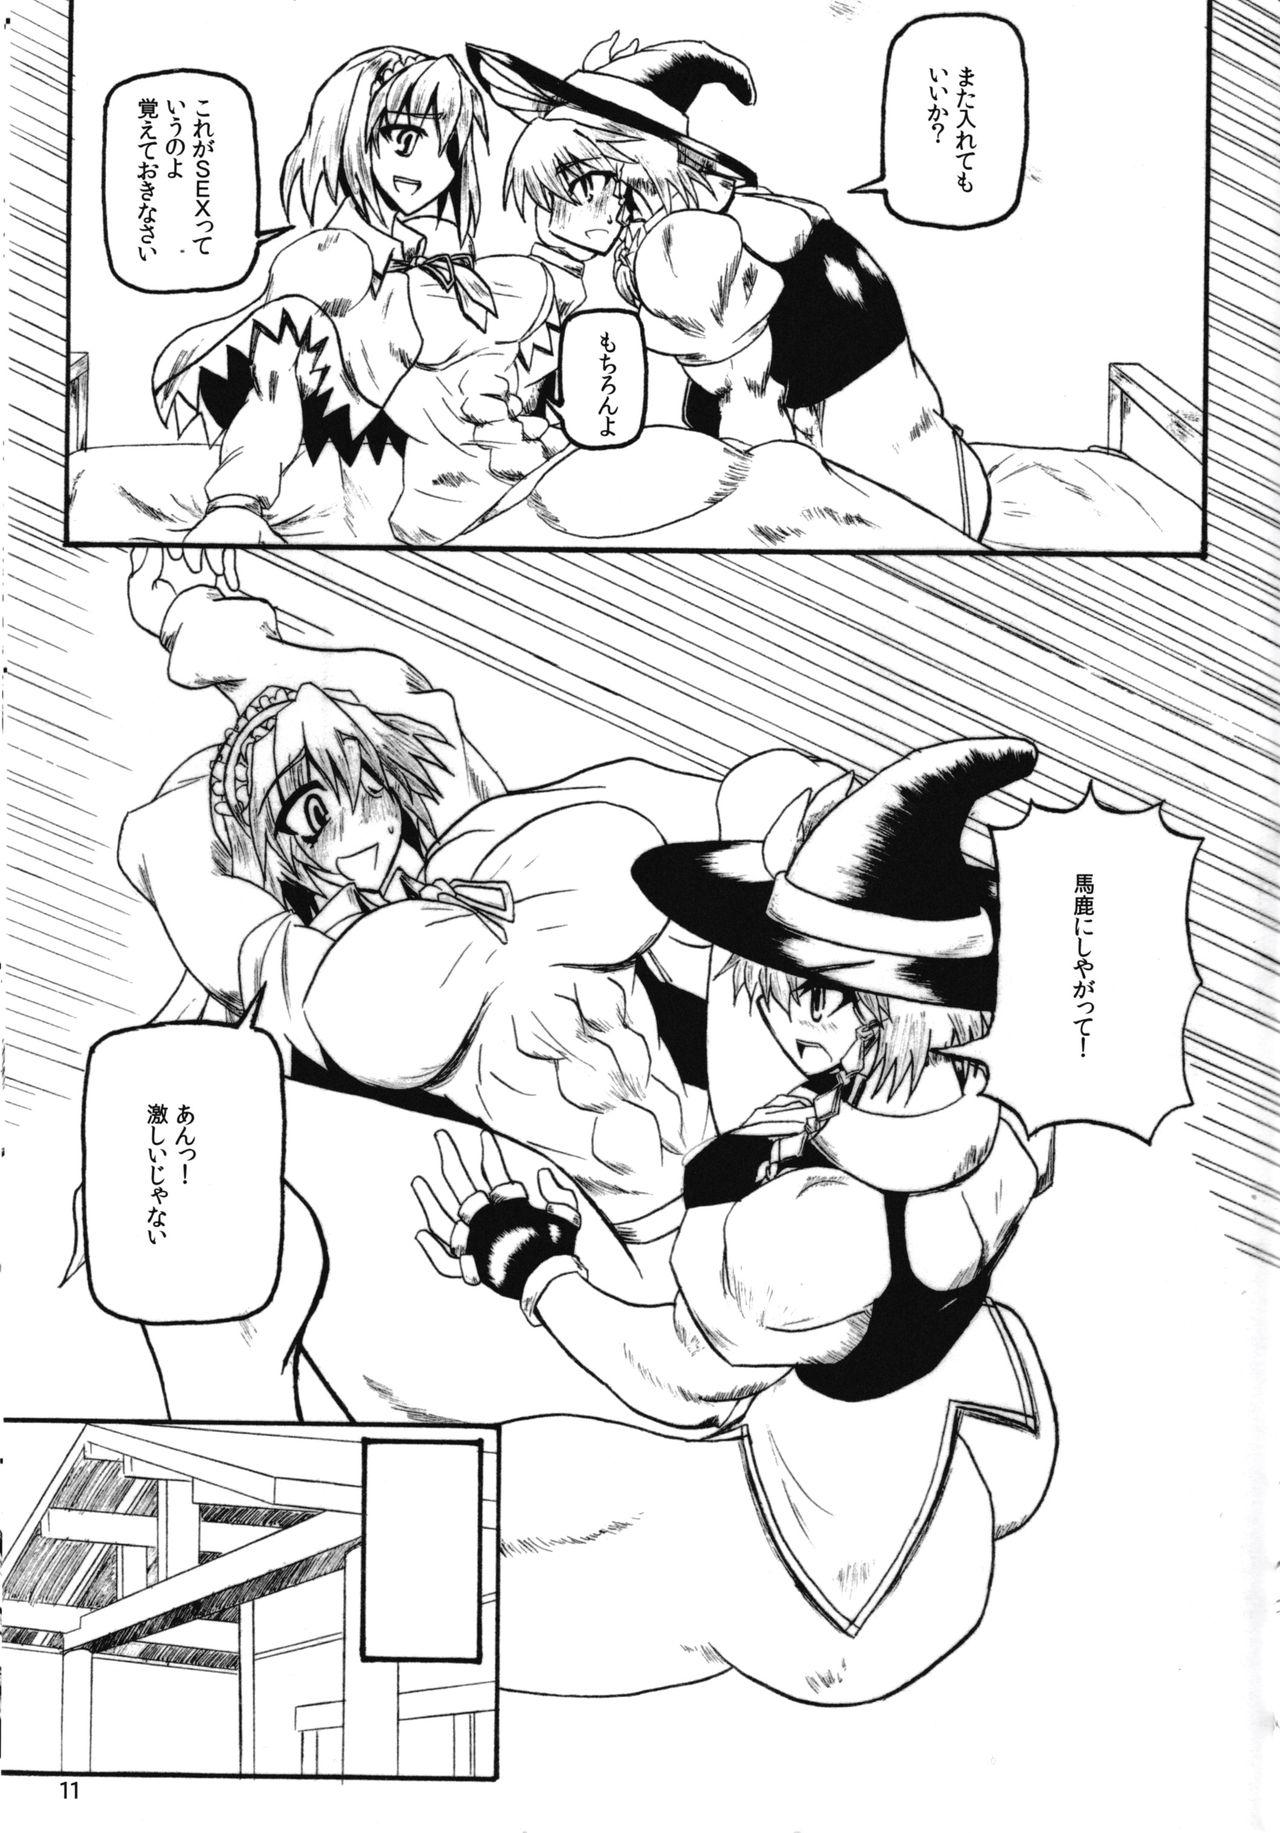 Free Amateur Exceeds Power of Human2 - Touhou project Rimjob - Page 11